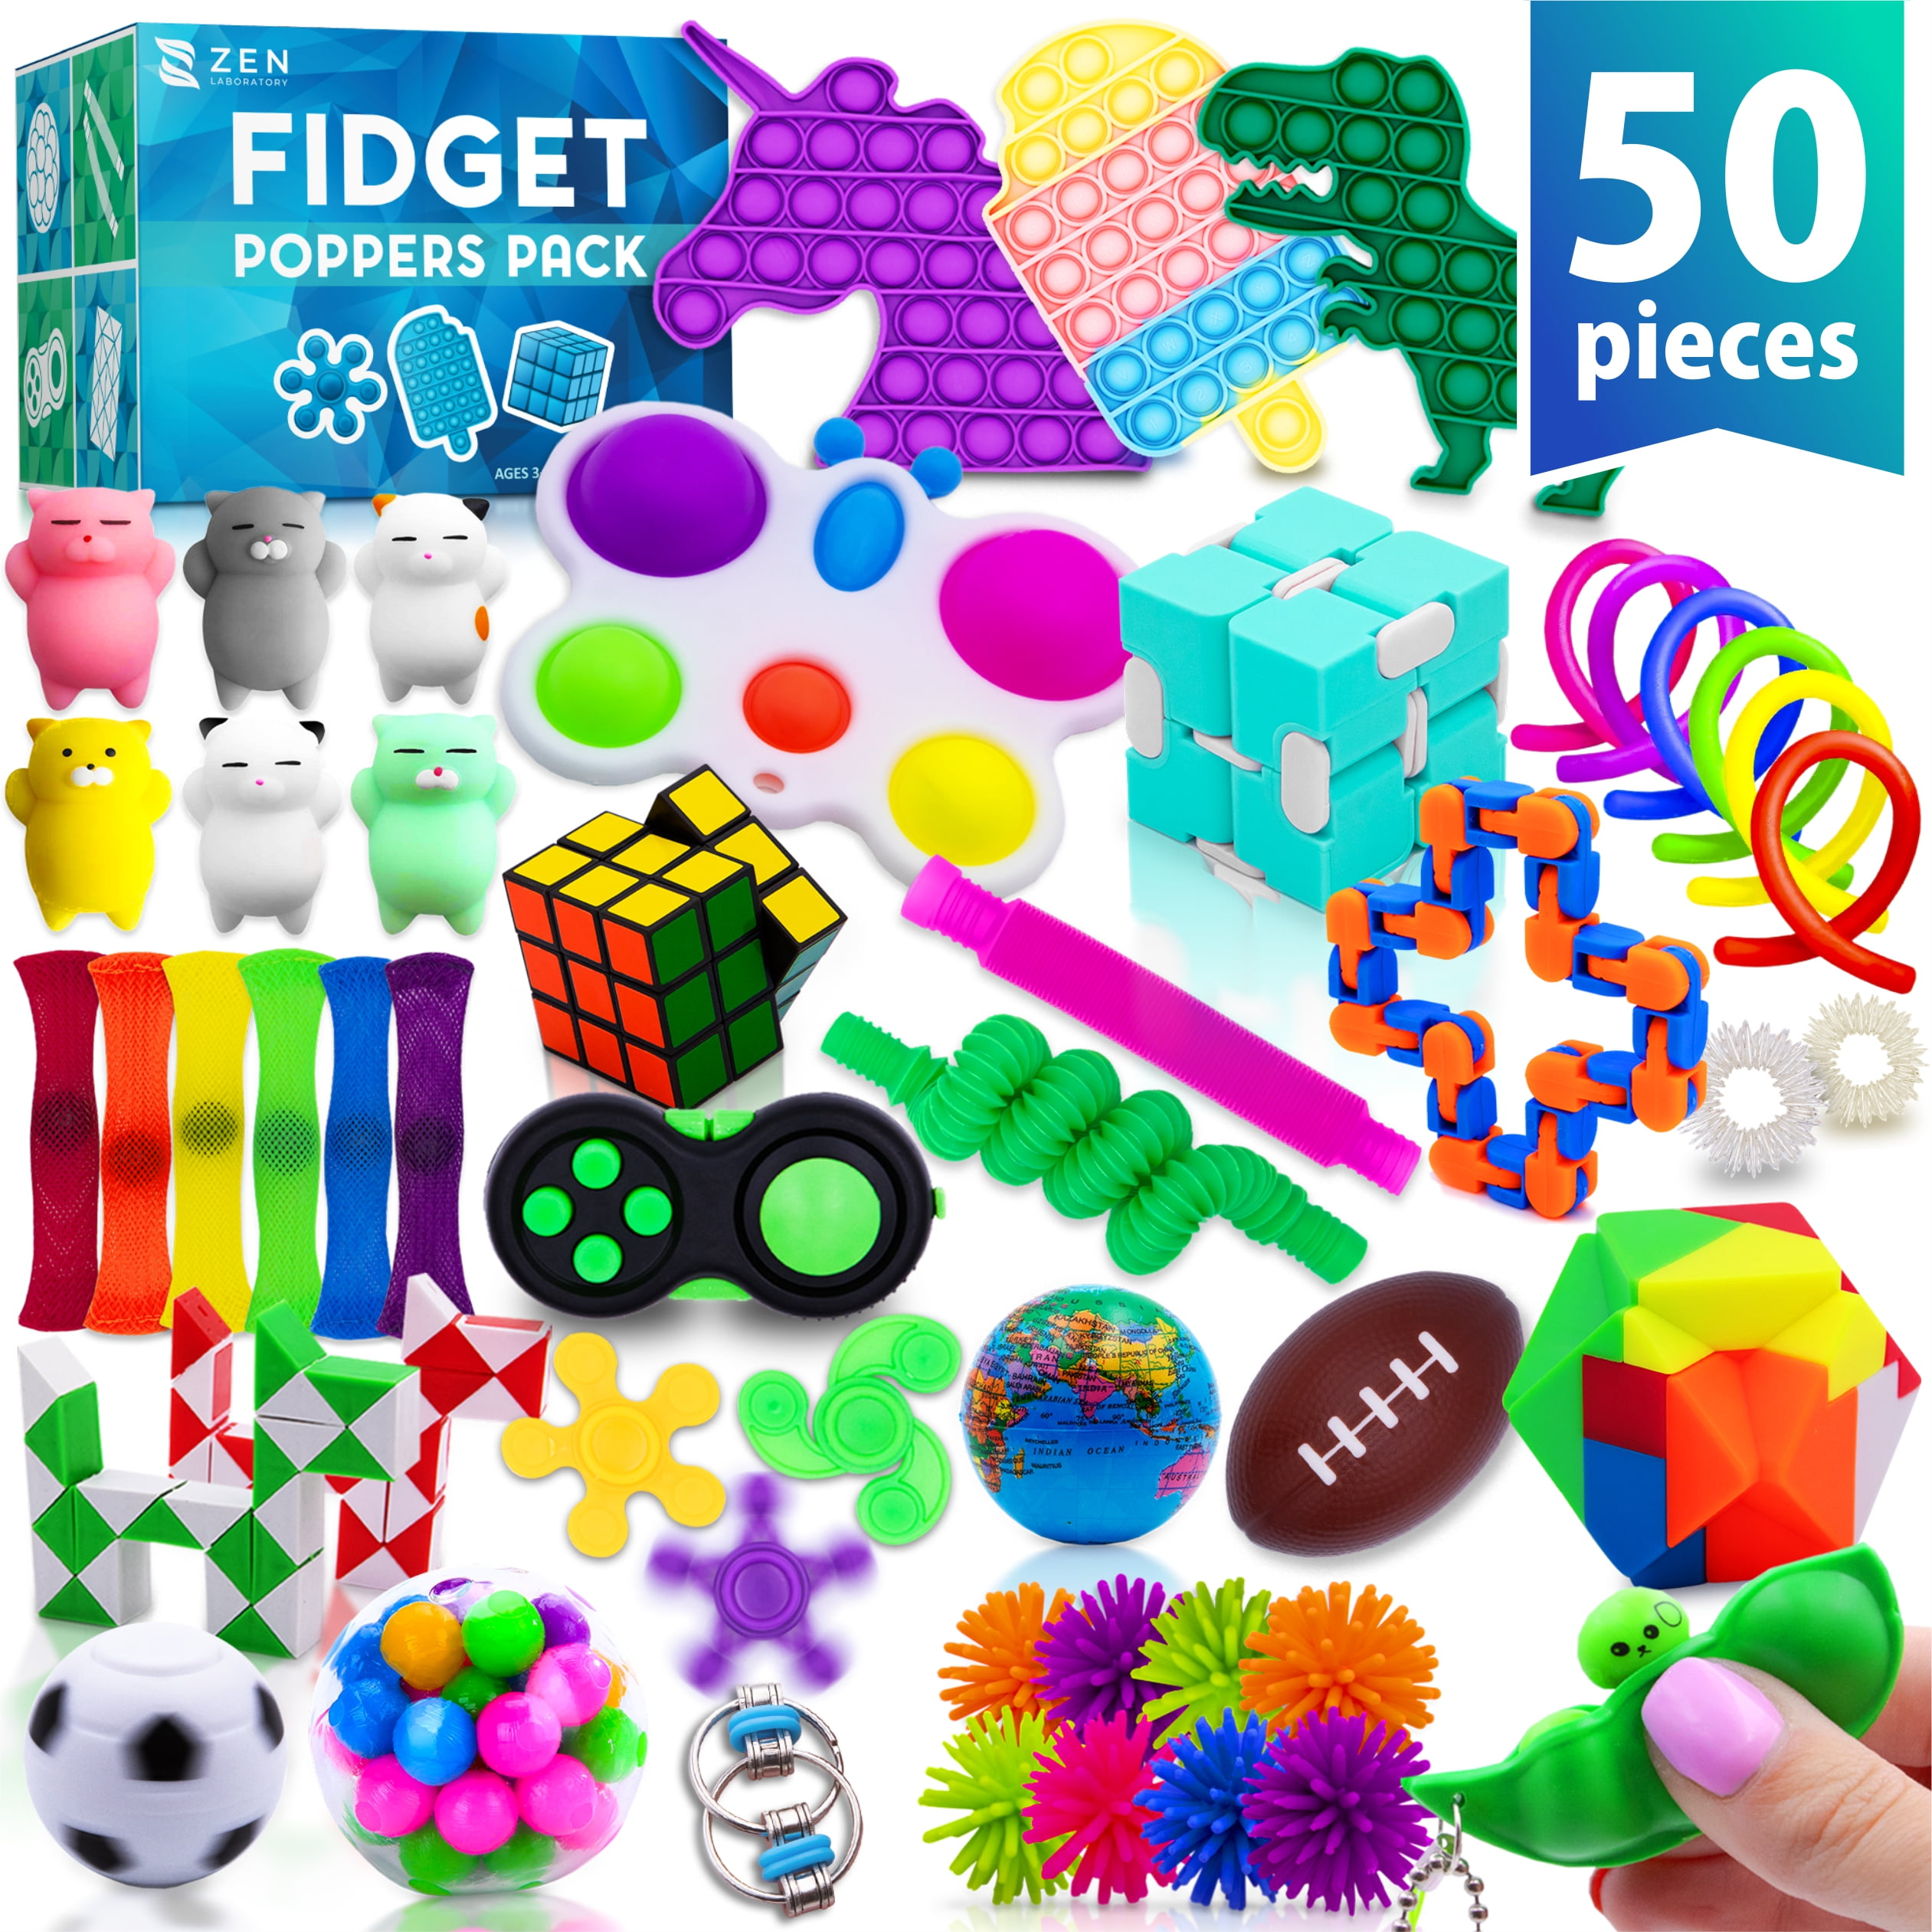 50 Piece Fidget Toys Pack Party Favors Gifts for Kids Adults